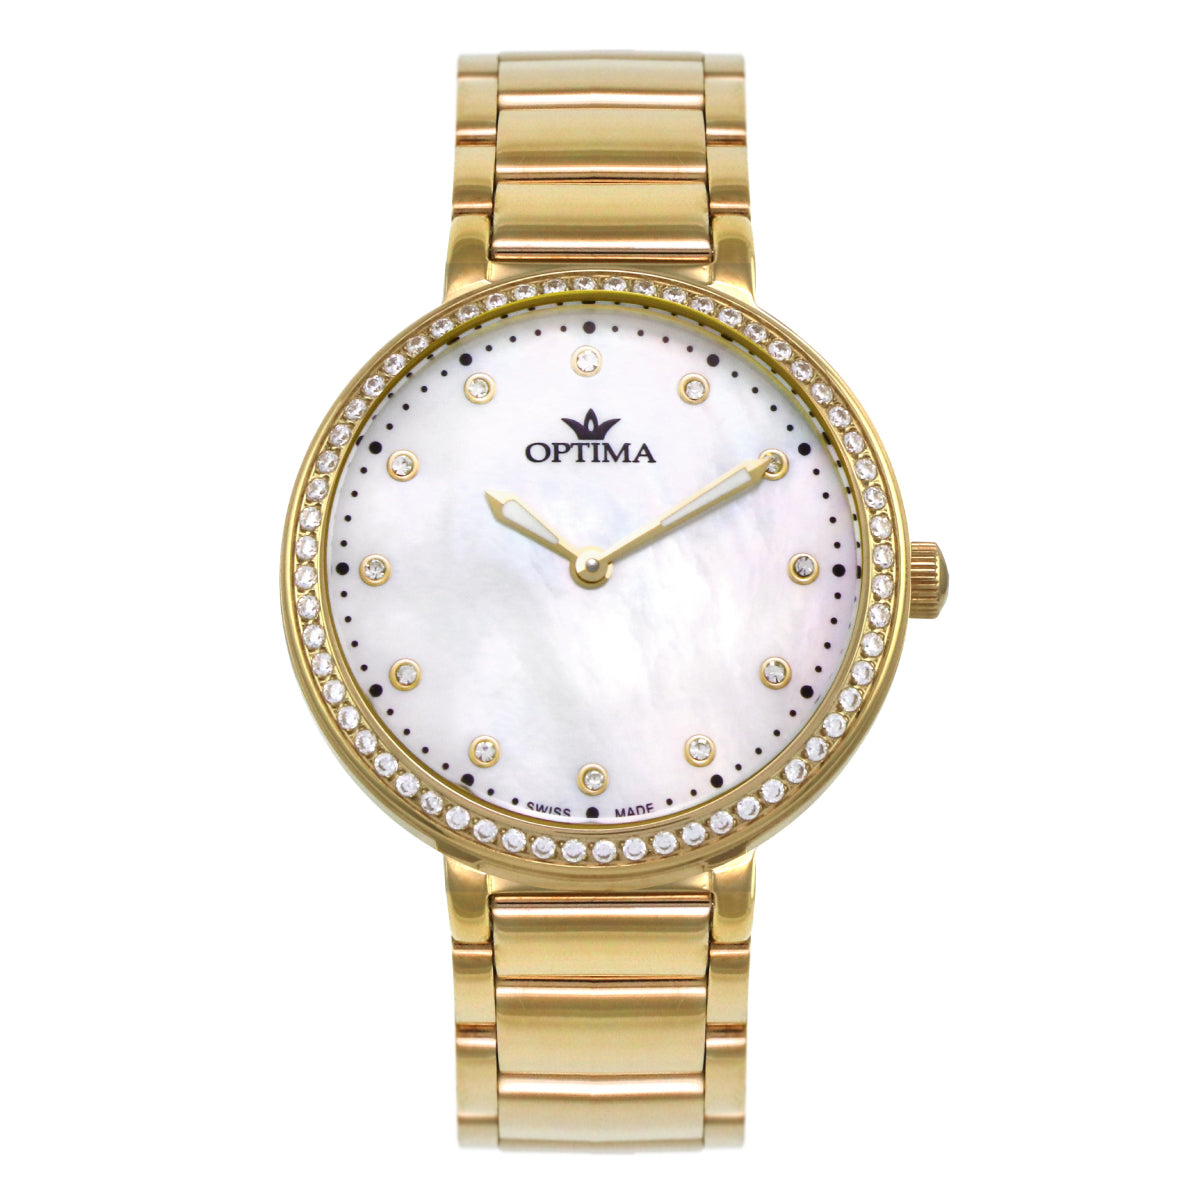 Optima Women's Swiss Quartz Watch with Pearly White Dial - OPT-0029